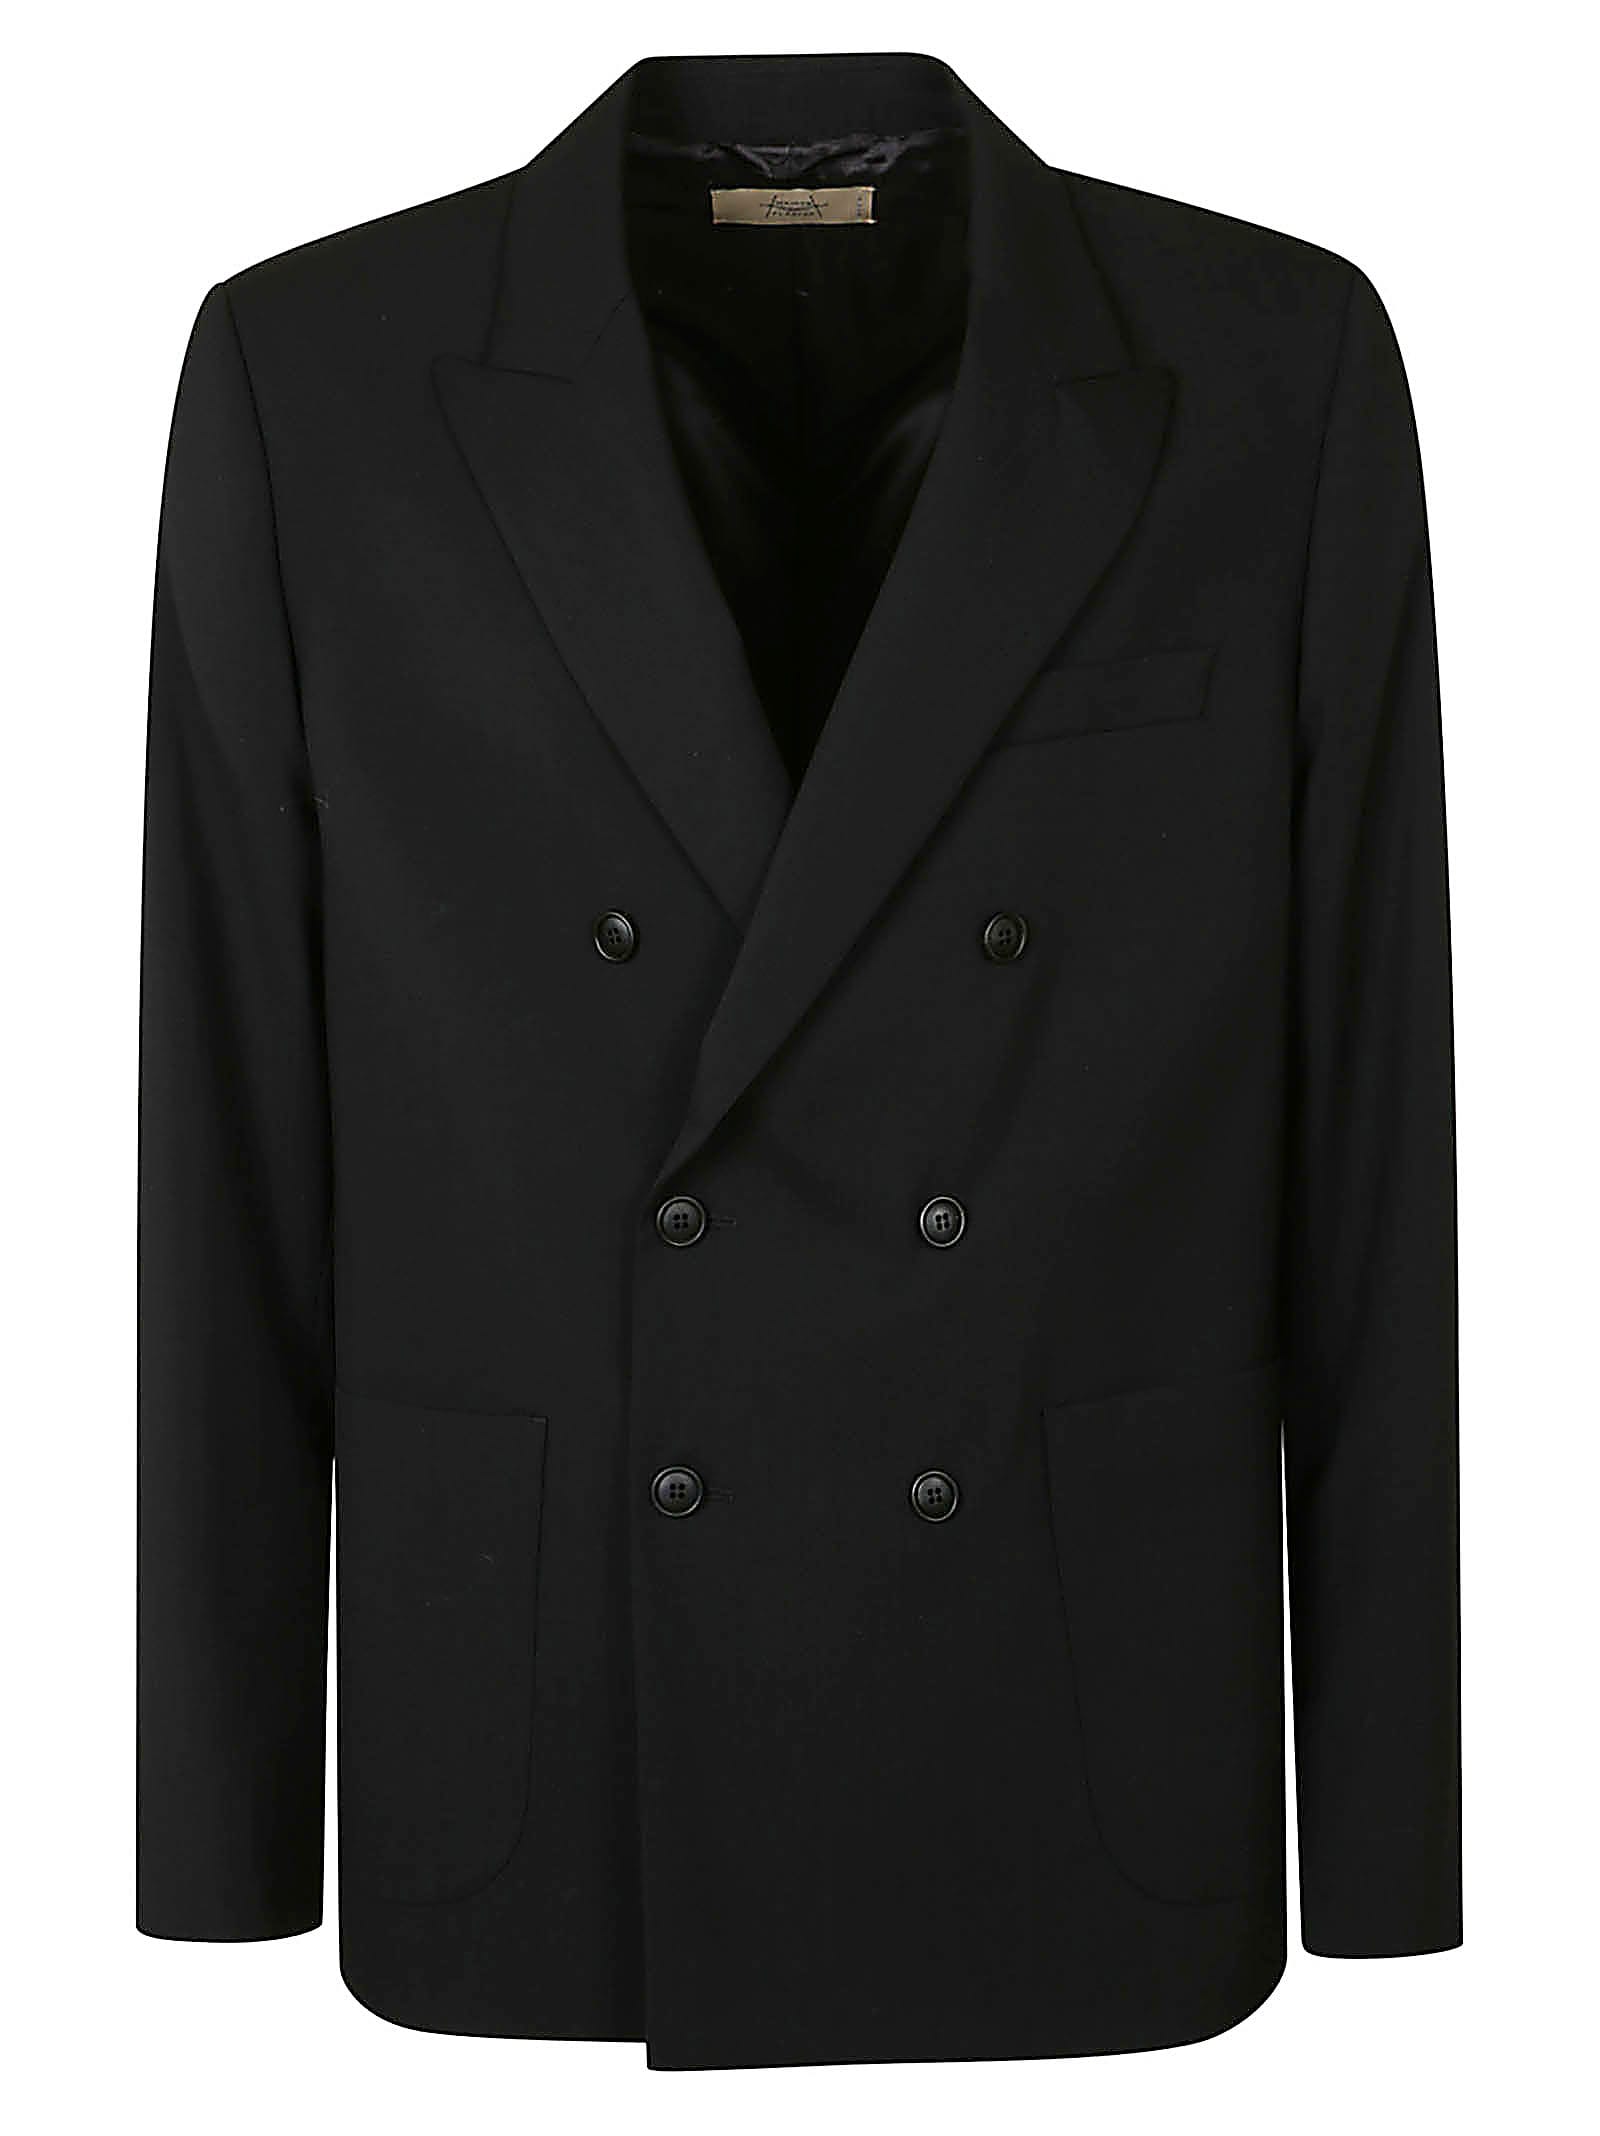 Patched Pocket Double-breasted Formal Dinner Jacket